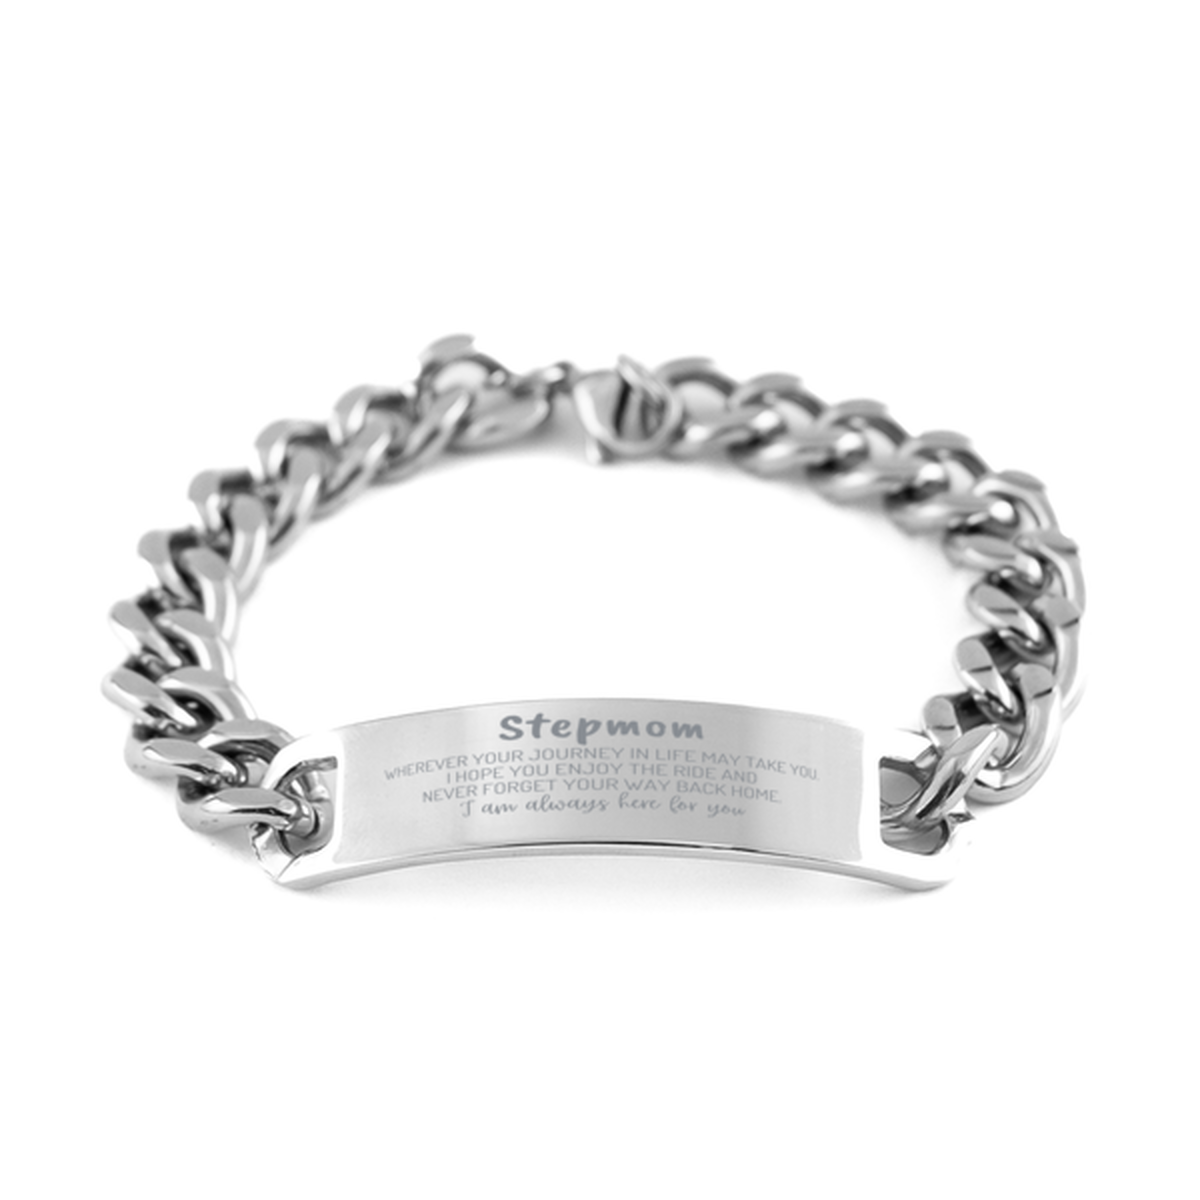 Stepmom wherever your journey in life may take you, I am always here for you Stepmom Cuban Chain Stainless Steel Bracelet, Awesome Christmas Gifts For Stepmom, Stepmom Birthday Gifts for Men Women Family Loved One